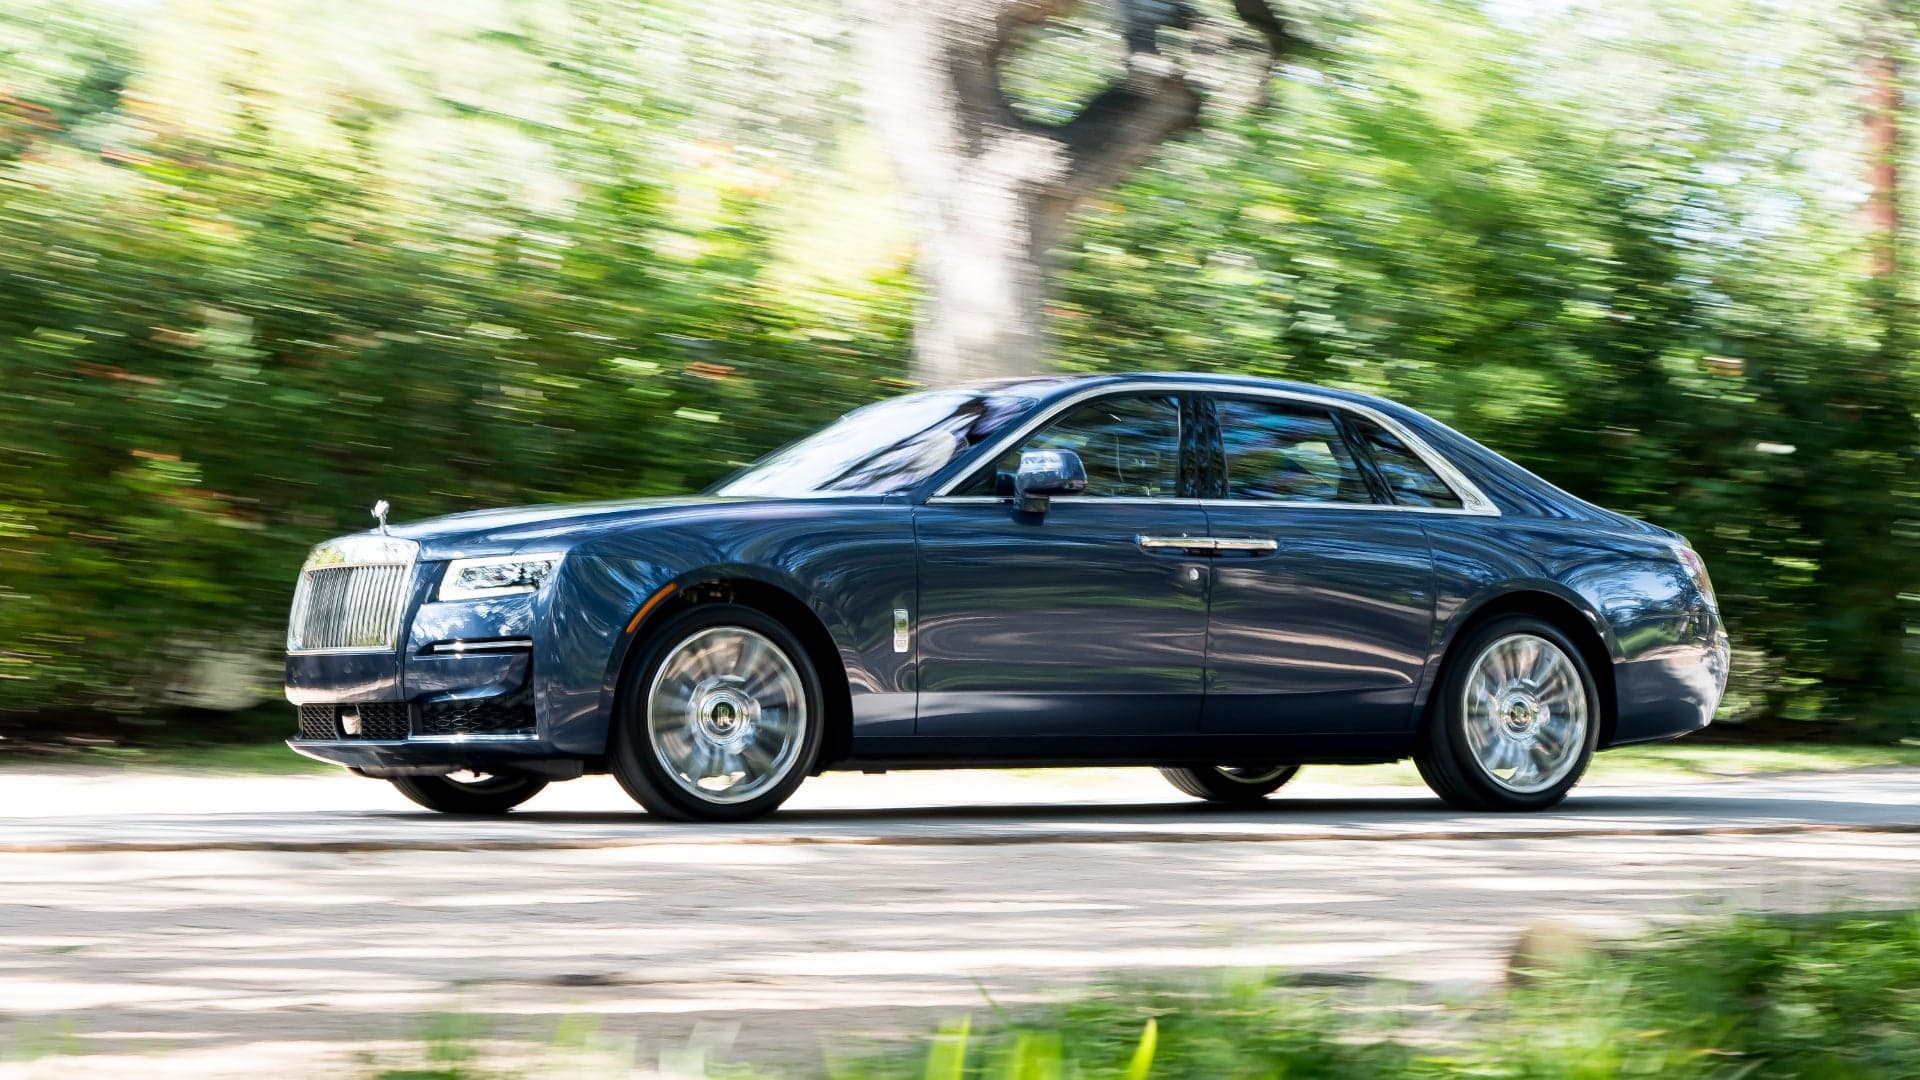 2021 Rolls-Royce Ghost: This Is the Car You Really Want When You Strike It Rich